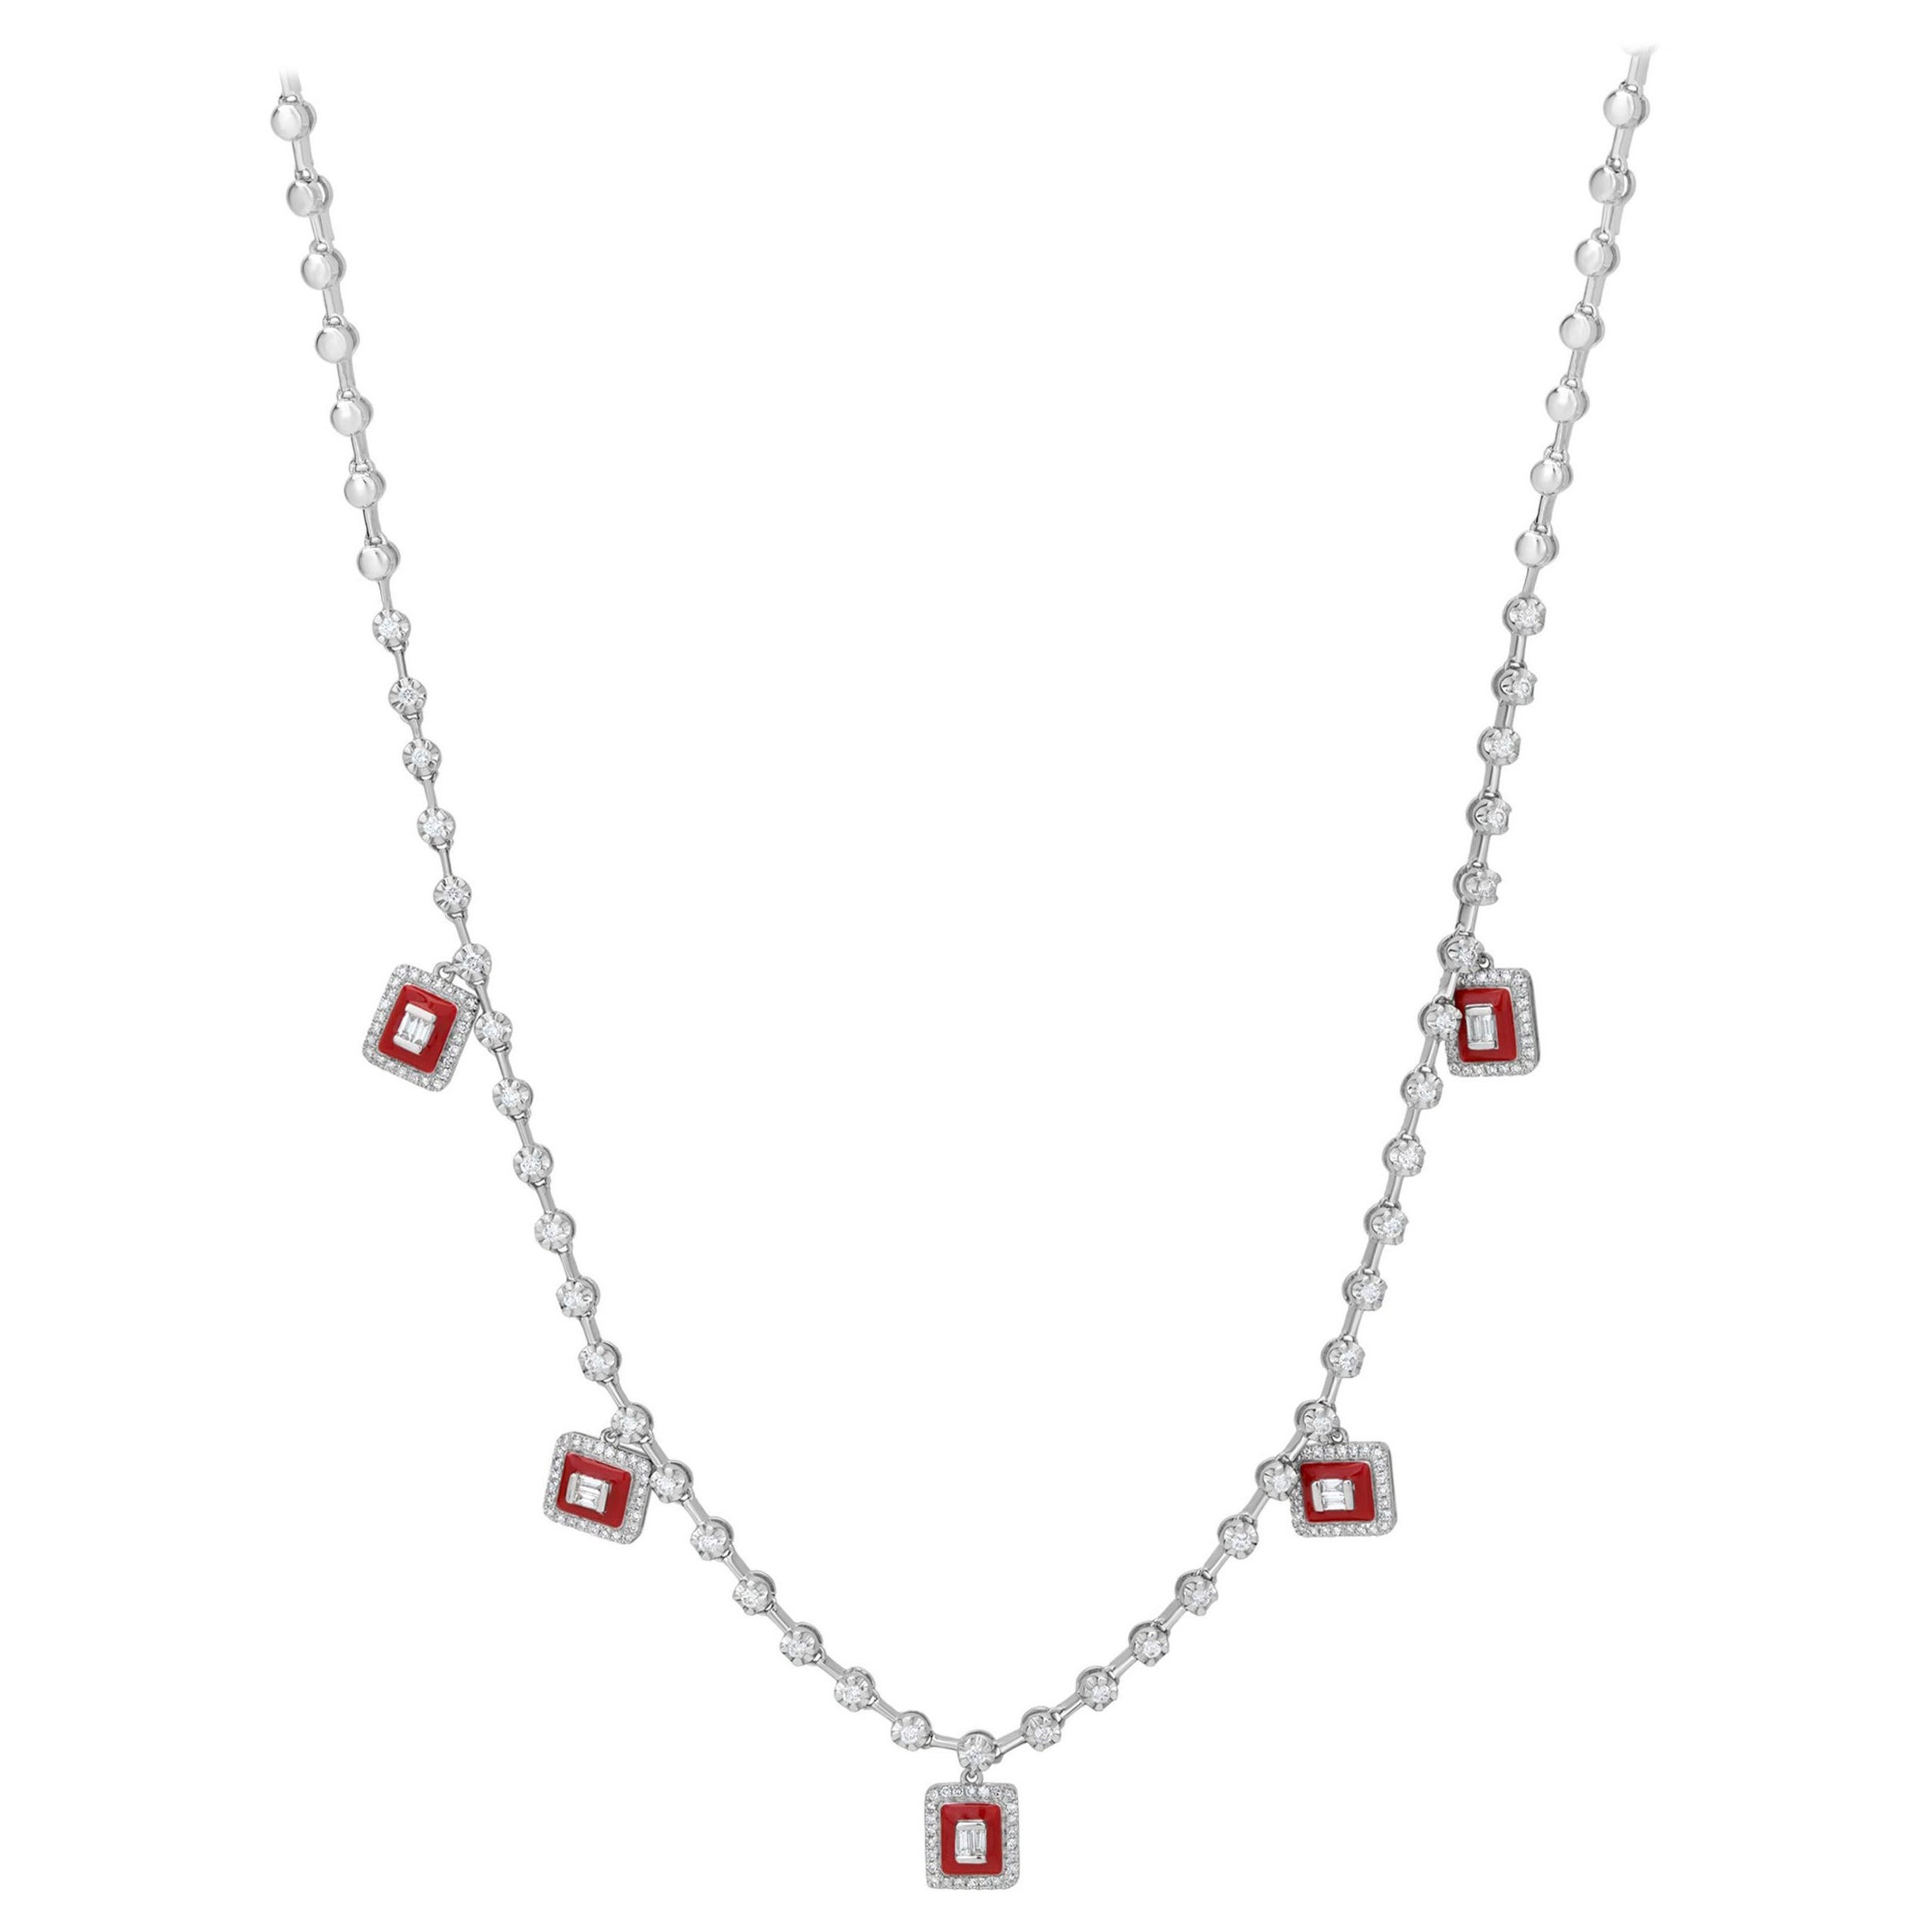 Luxle 1ct T.W. Diamond Framed Charm Necklace in 18k White Gold For Sale